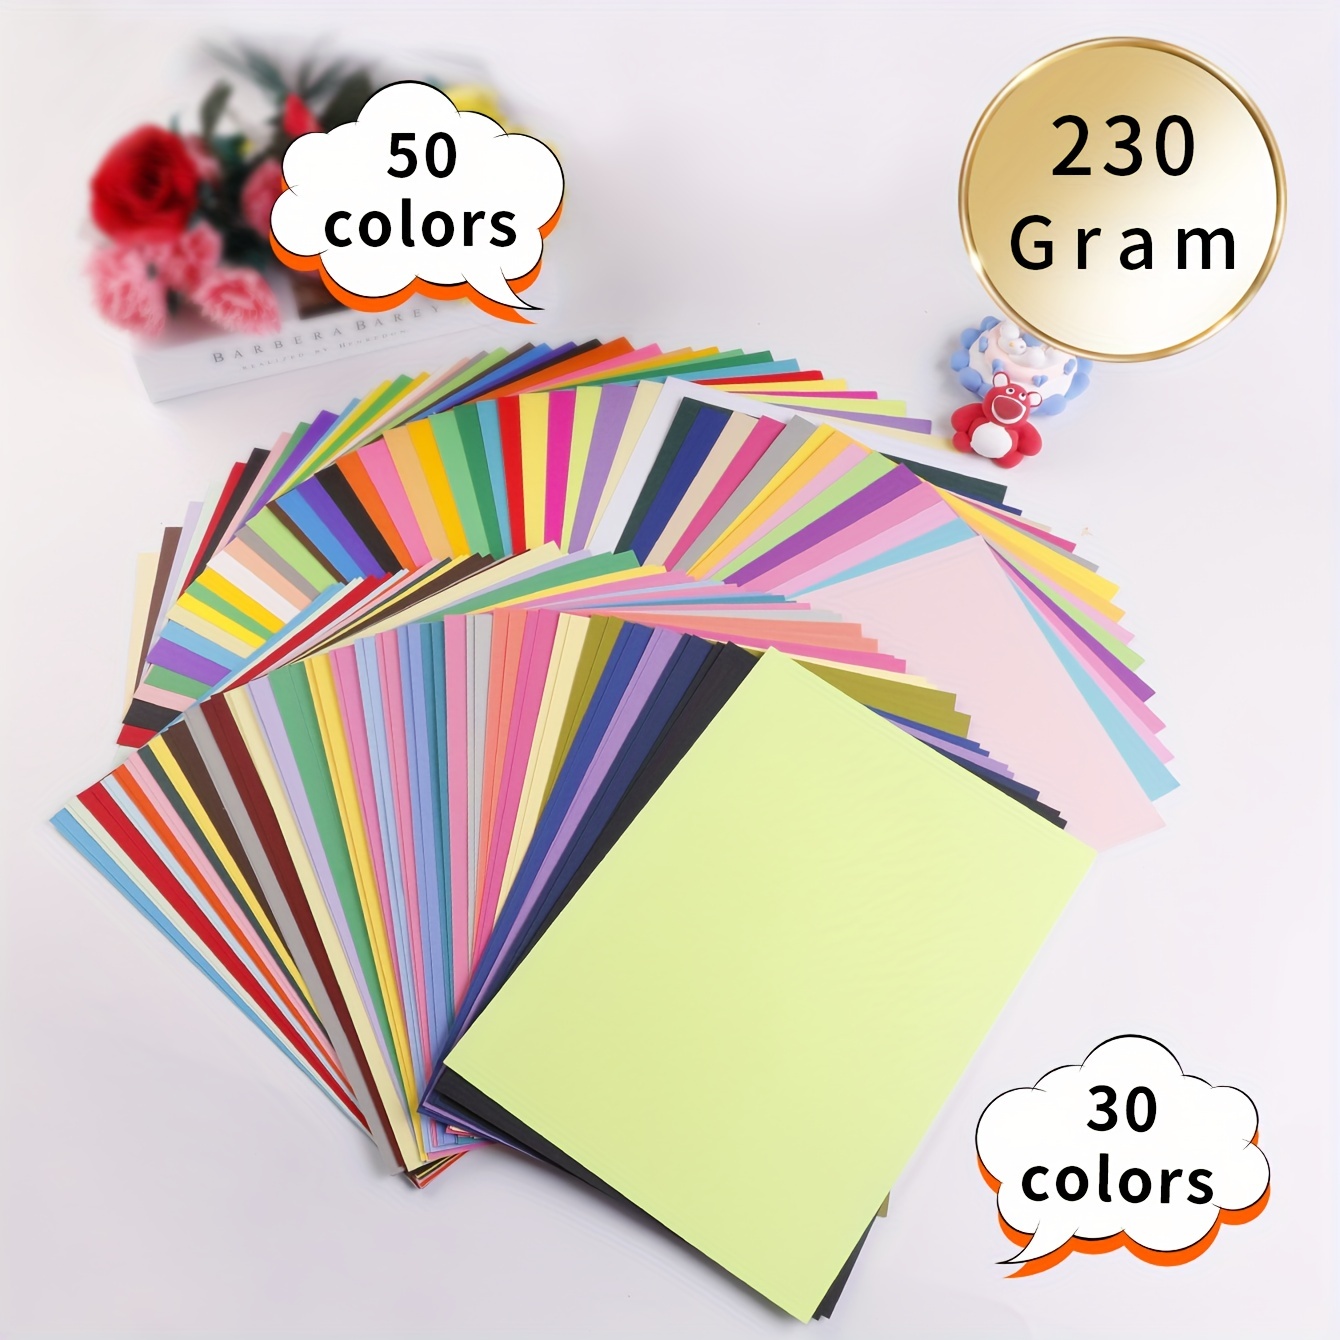 

50/60pcs 230gms Handmade Diy Model Making: Brighten Up Your Greeting Cards With 30/50 Colors Multicolor Paper Color Card Paper!